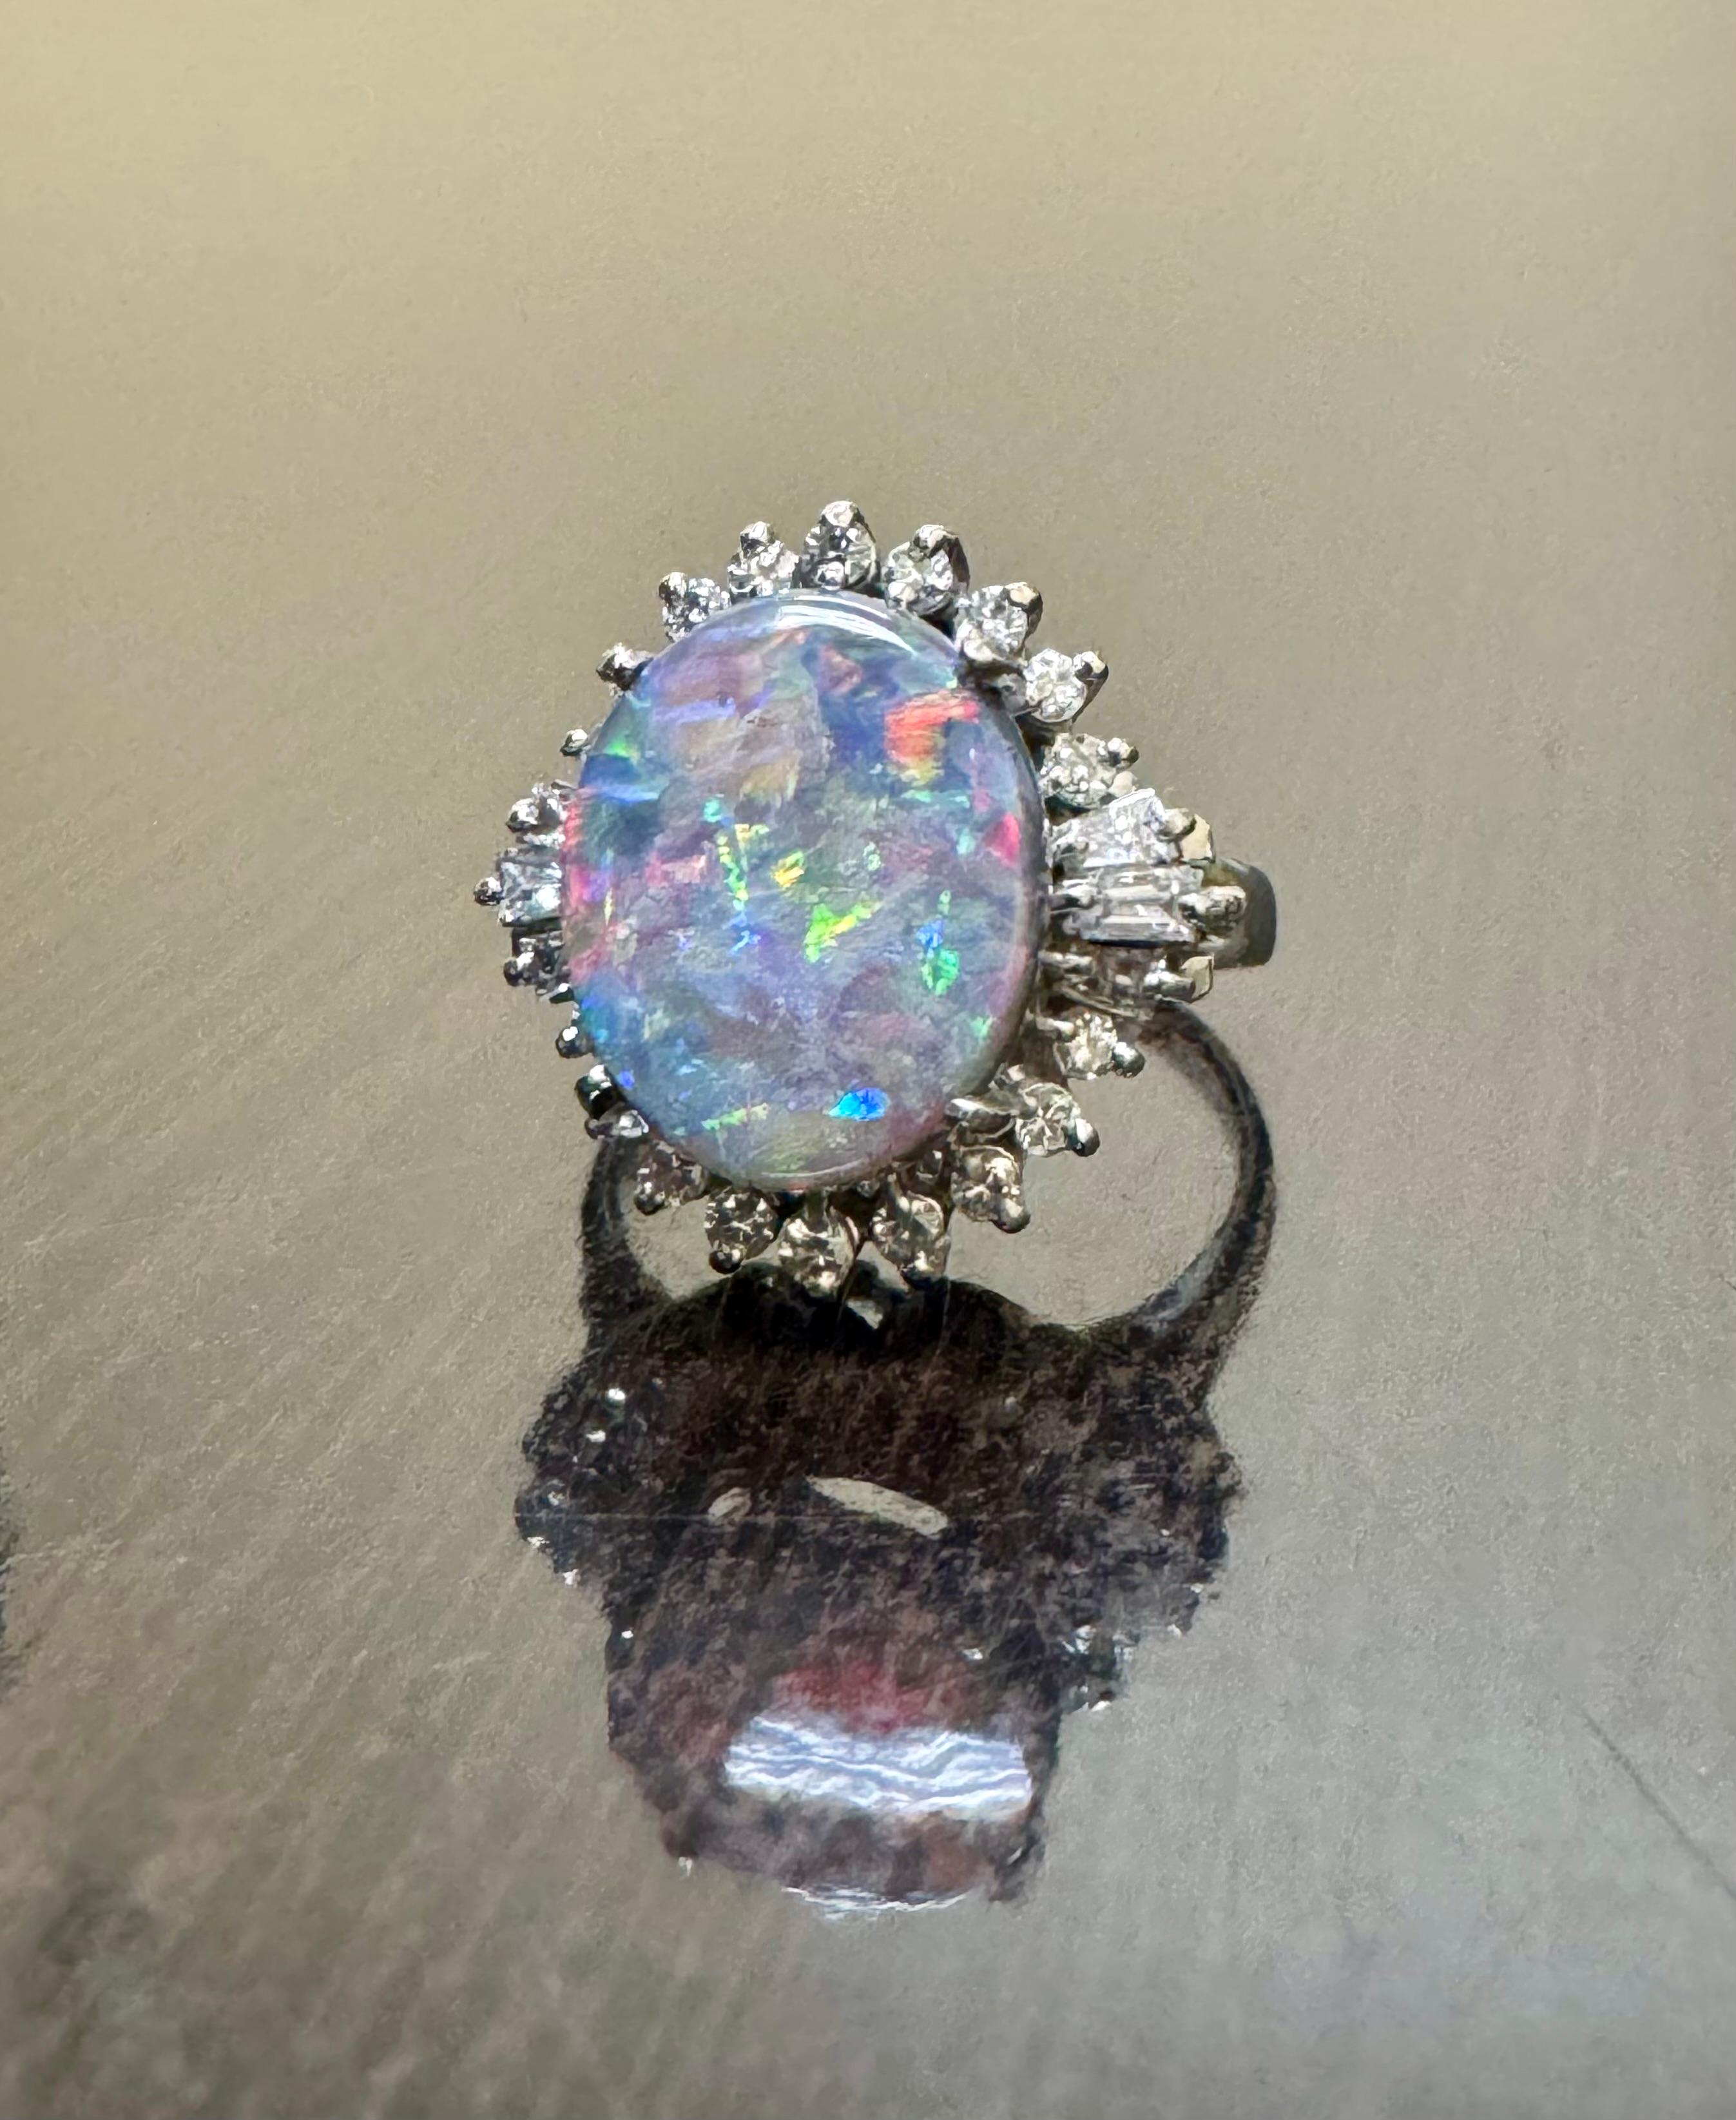 DeKara Designs Collection 

Our latest design! An entirely handmade ONE OF A KIND elegant and lustrous Australian Black Opal cabochon surrounded by beautiful baguette and round diamonds in an Art Deco inspired platinum setting.

Metal- 90% Platinum,